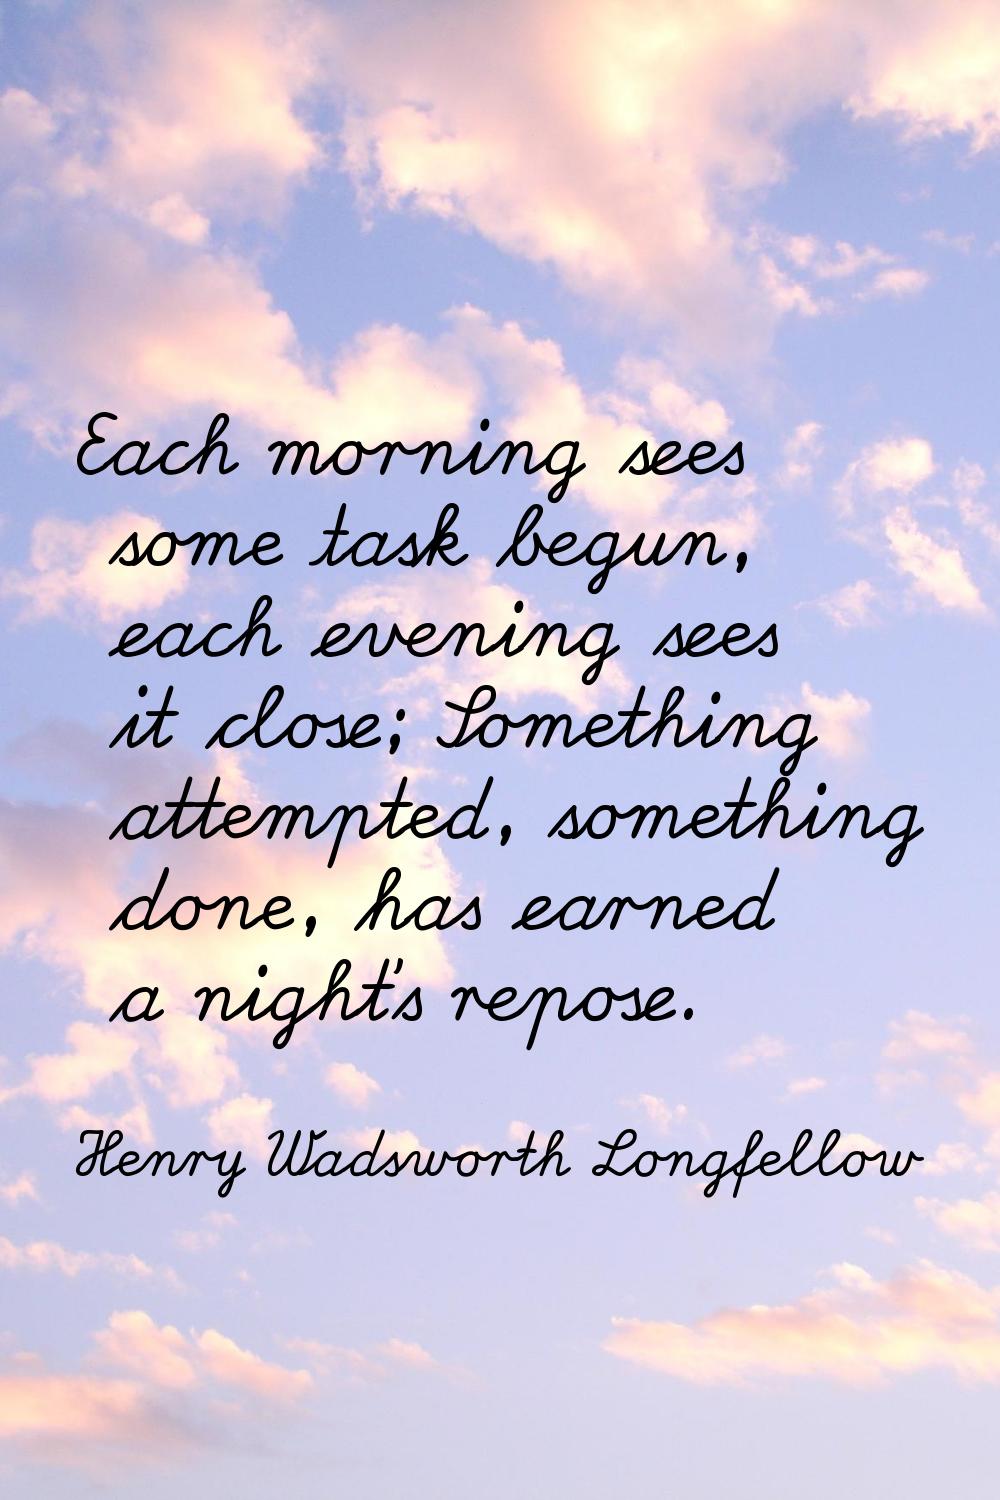 Each morning sees some task begun, each evening sees it close; Something attempted, something done,